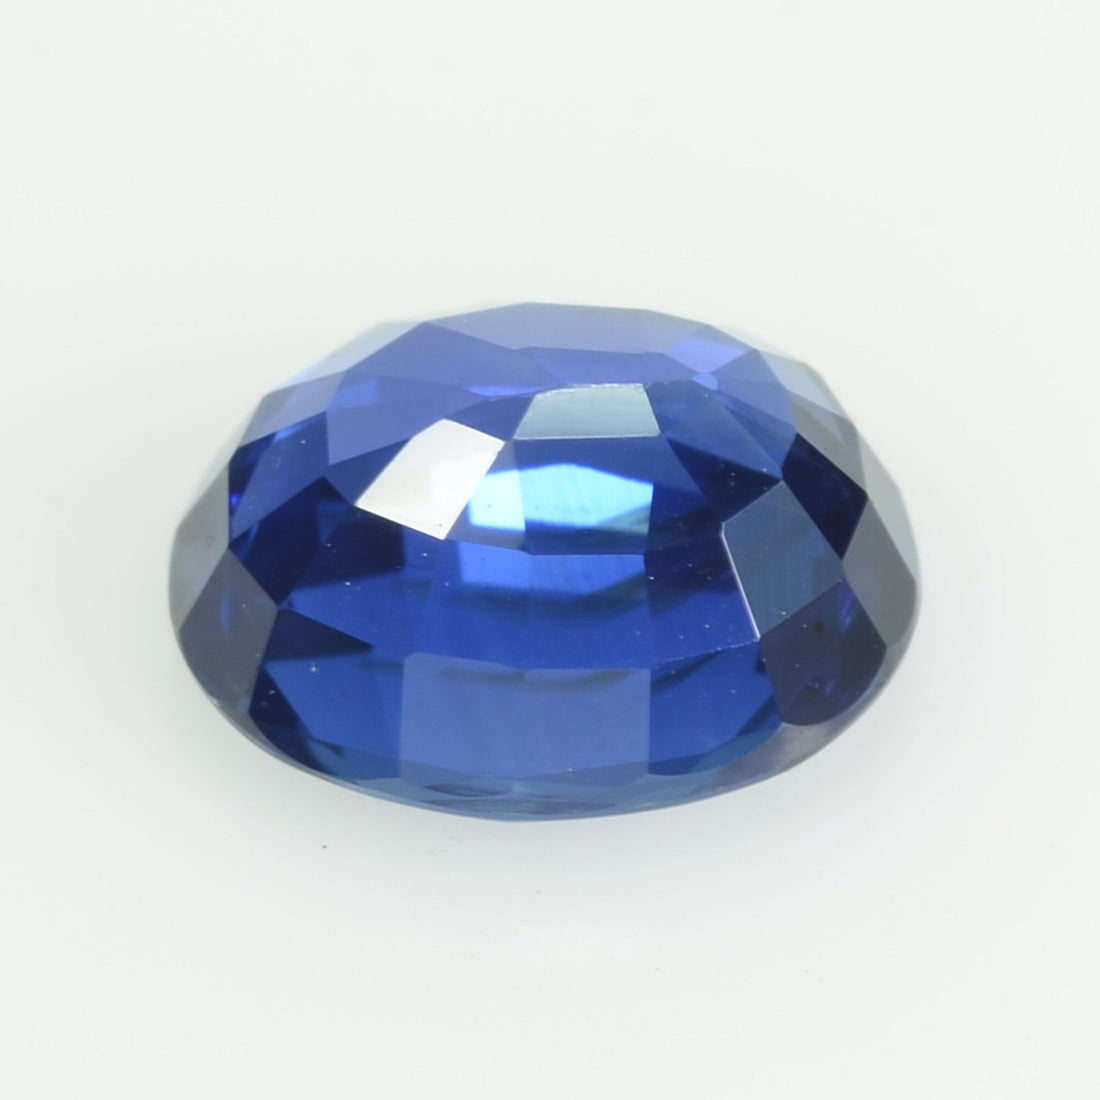 1.30 cts natural blue sapphire loose gemstone oval cut AGL Certified